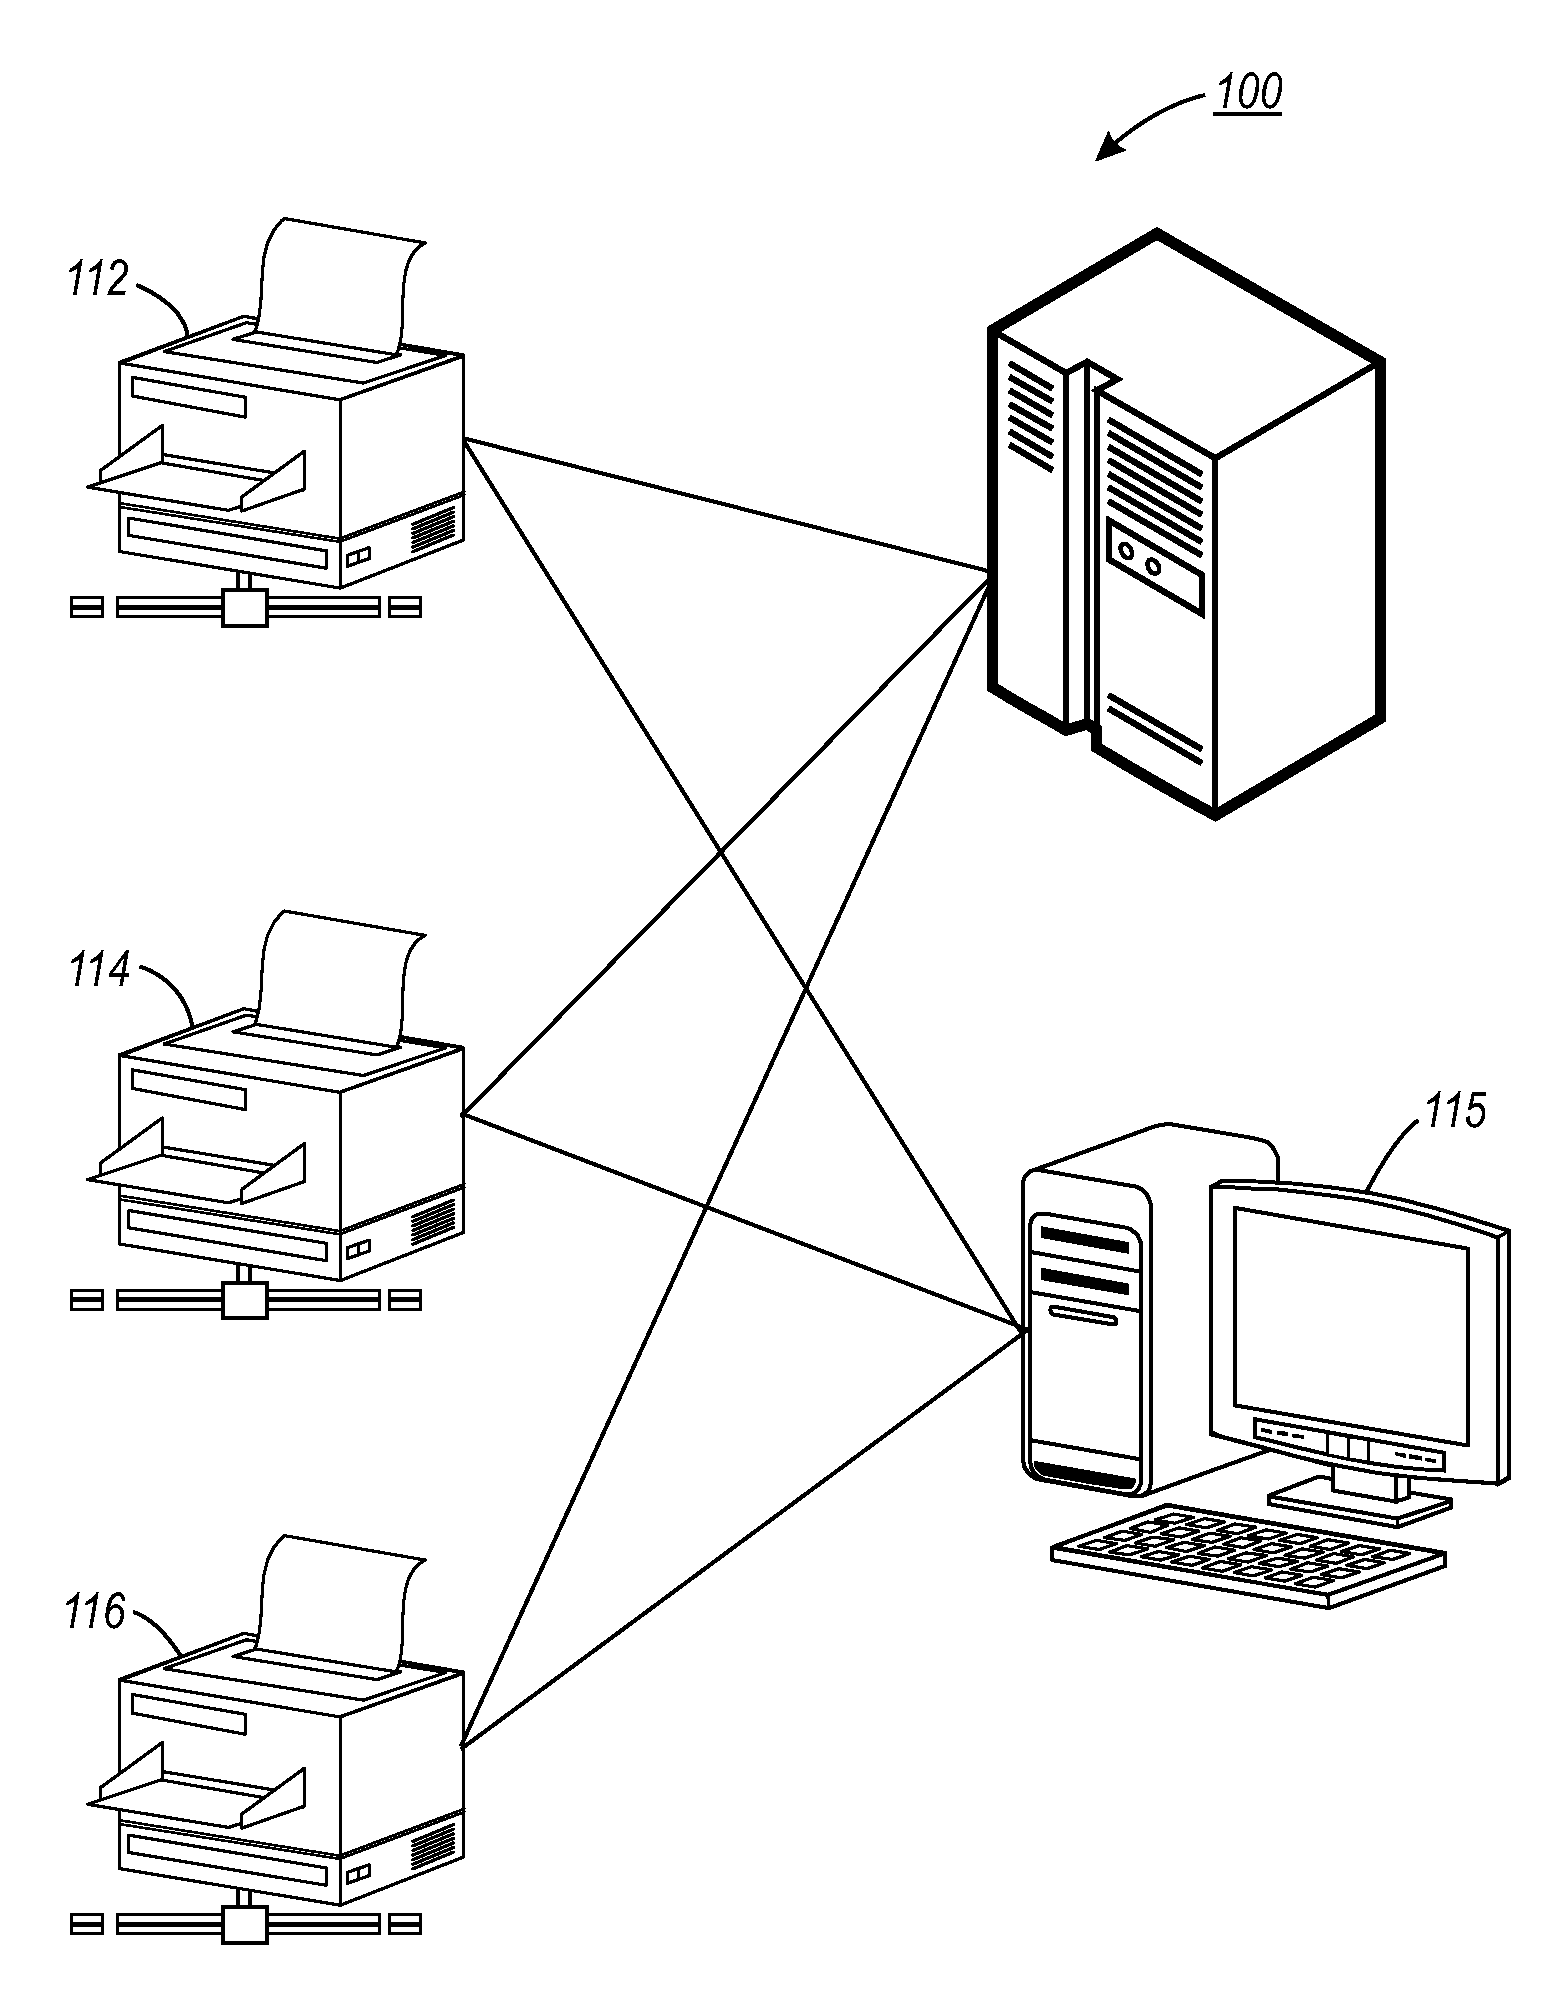 Method and system for automatic sharing and customization in a fleet of multi-function devices